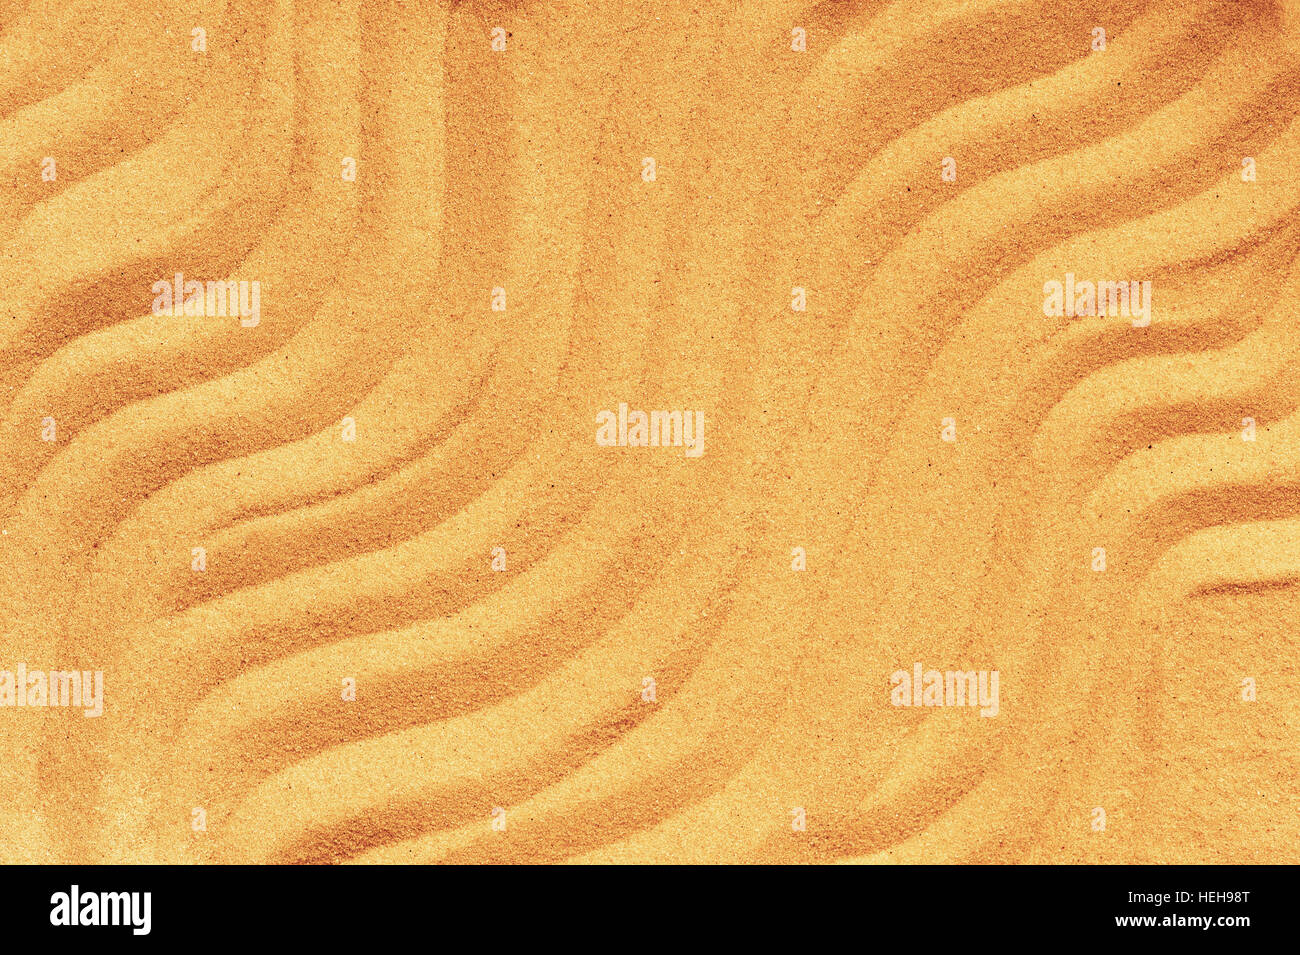 Pattern on the yellow sand, yellow wavy lines Stock Photo